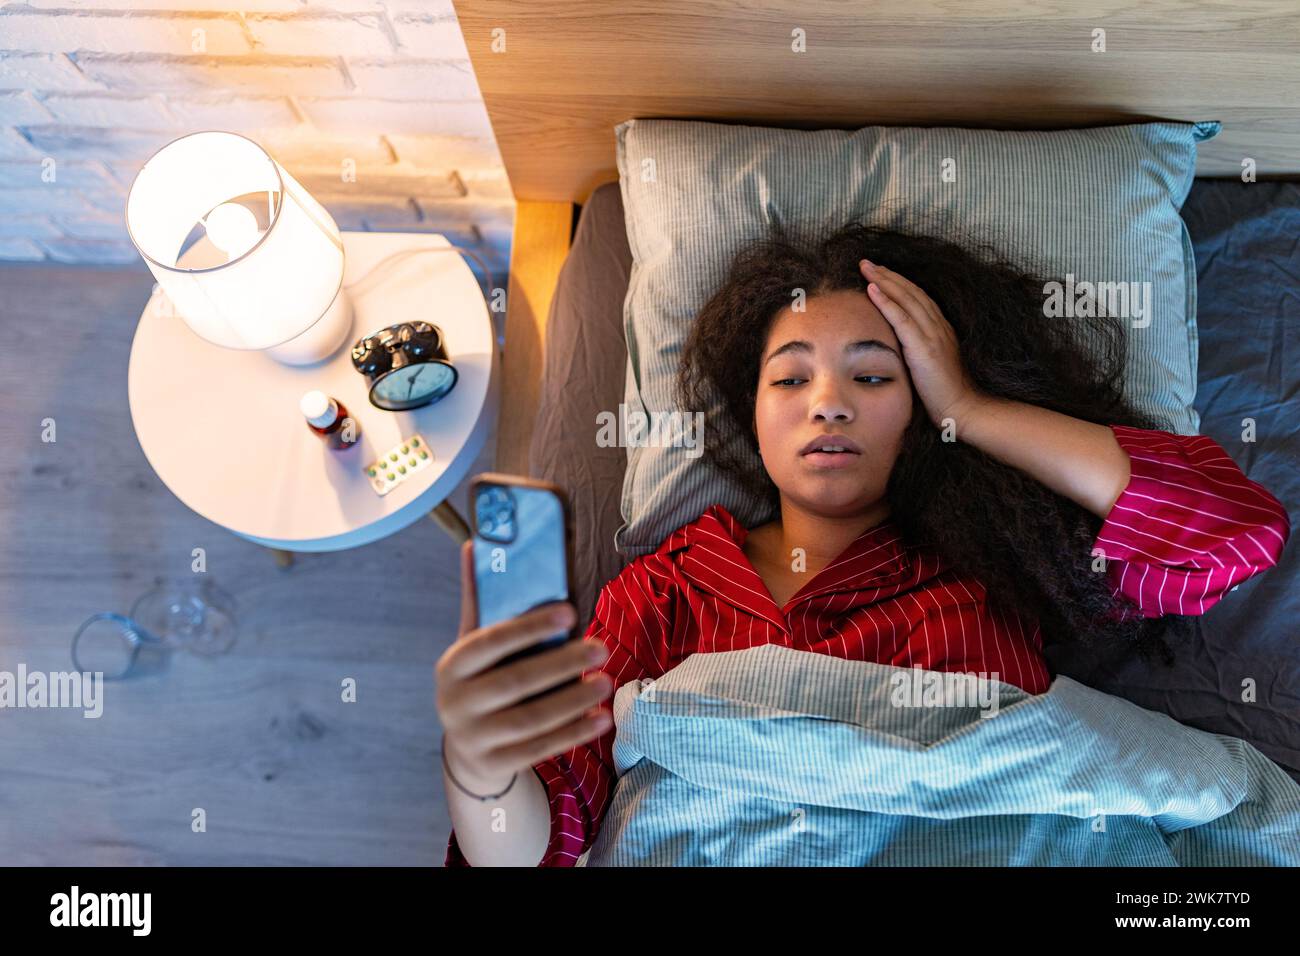 Woman can't fall asleep, insomnia a sleep problems. Concept of sleep routine and techniques for better sleep. Stock Photo